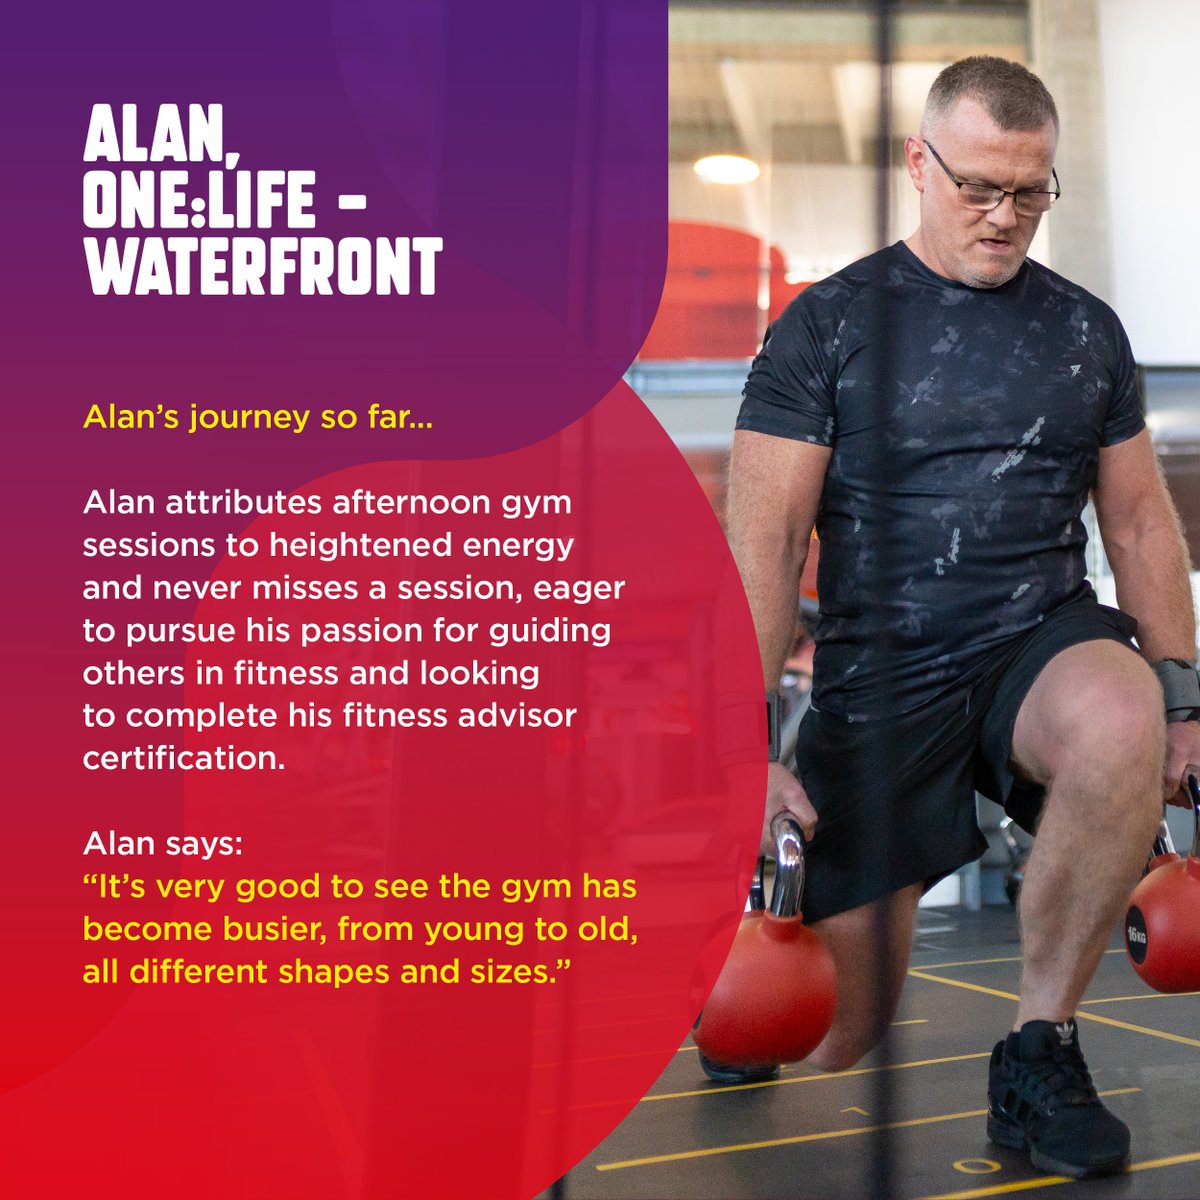 Alan is a One:Life member and here is why he loves coming to Inverclyde. 'It’s very good to see the gym has become busier, from young to old, all different shapes and sizes.” Check out our One:Life membership here 👇 ilgetactive.com